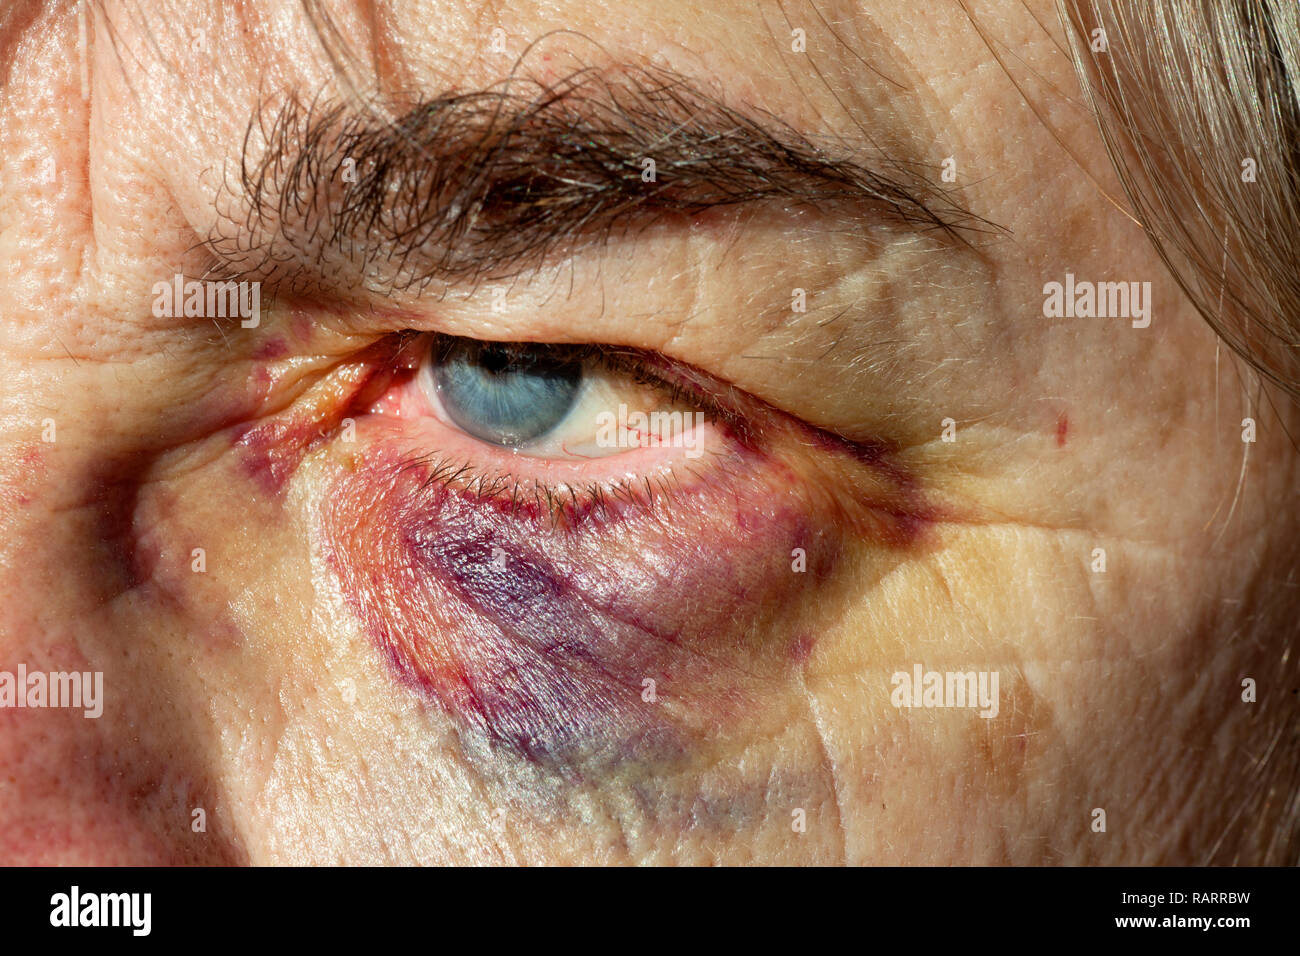 Black eye facial injury on the face of a woman. Stock Photo